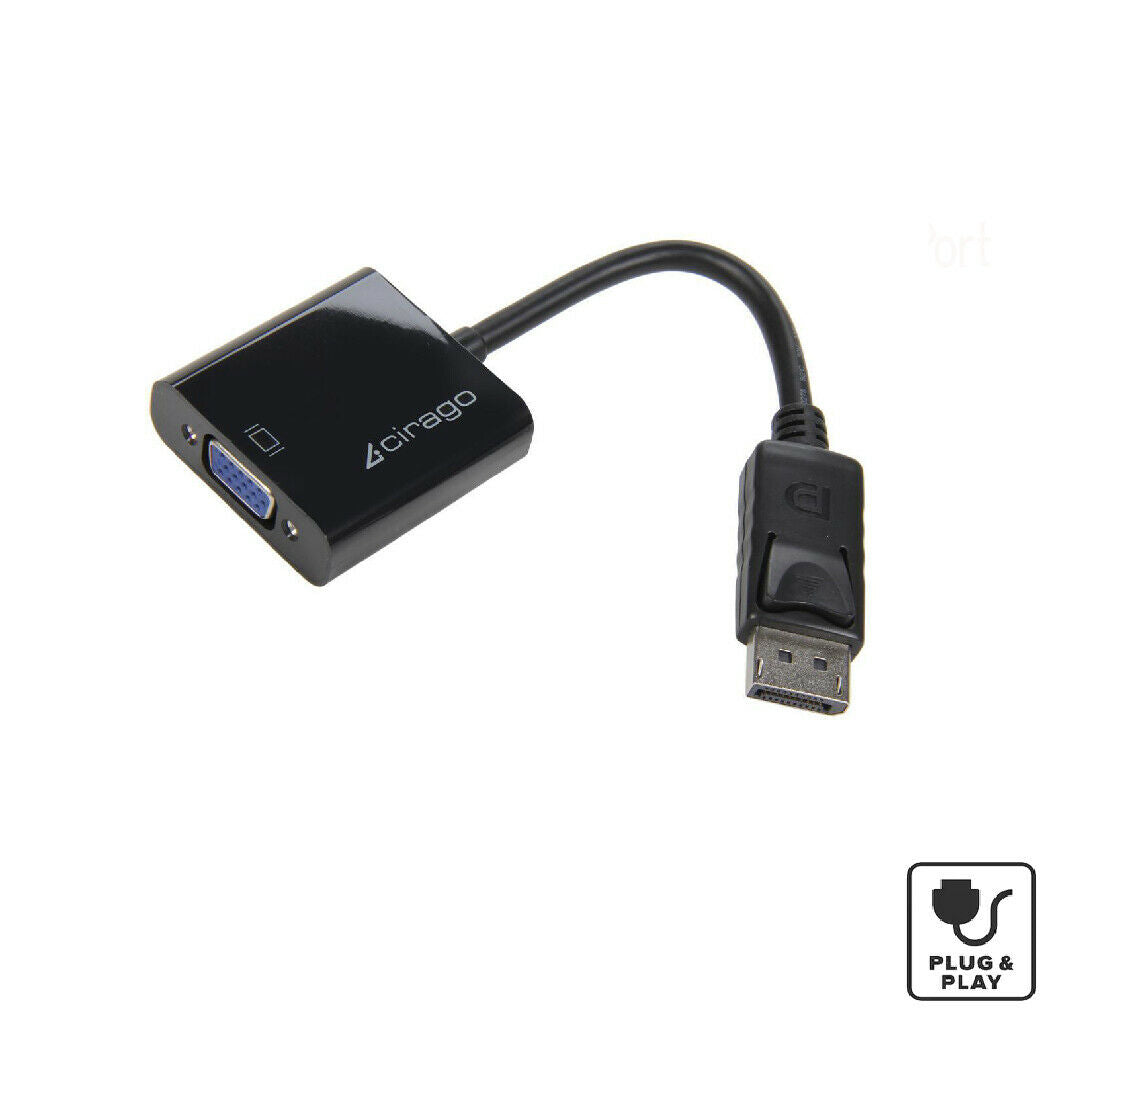 Cirago DisplayPort DP to VGA 1080P Video Converter Cable Adapter for PC Laptop